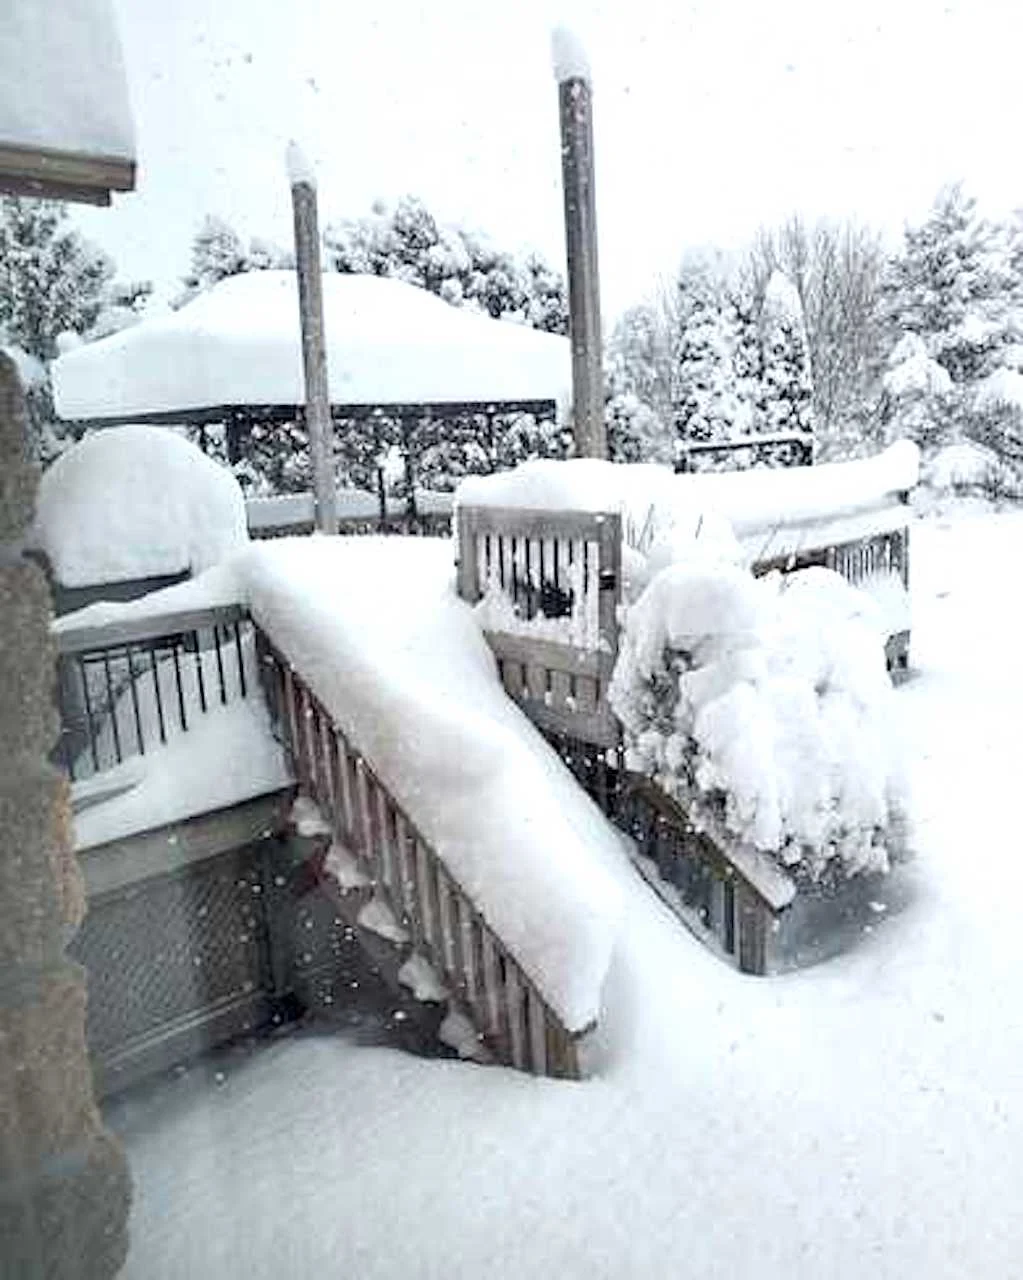 IN PHOTOS: Squalls blast parts of southern Ontario with 30+ cm of snow